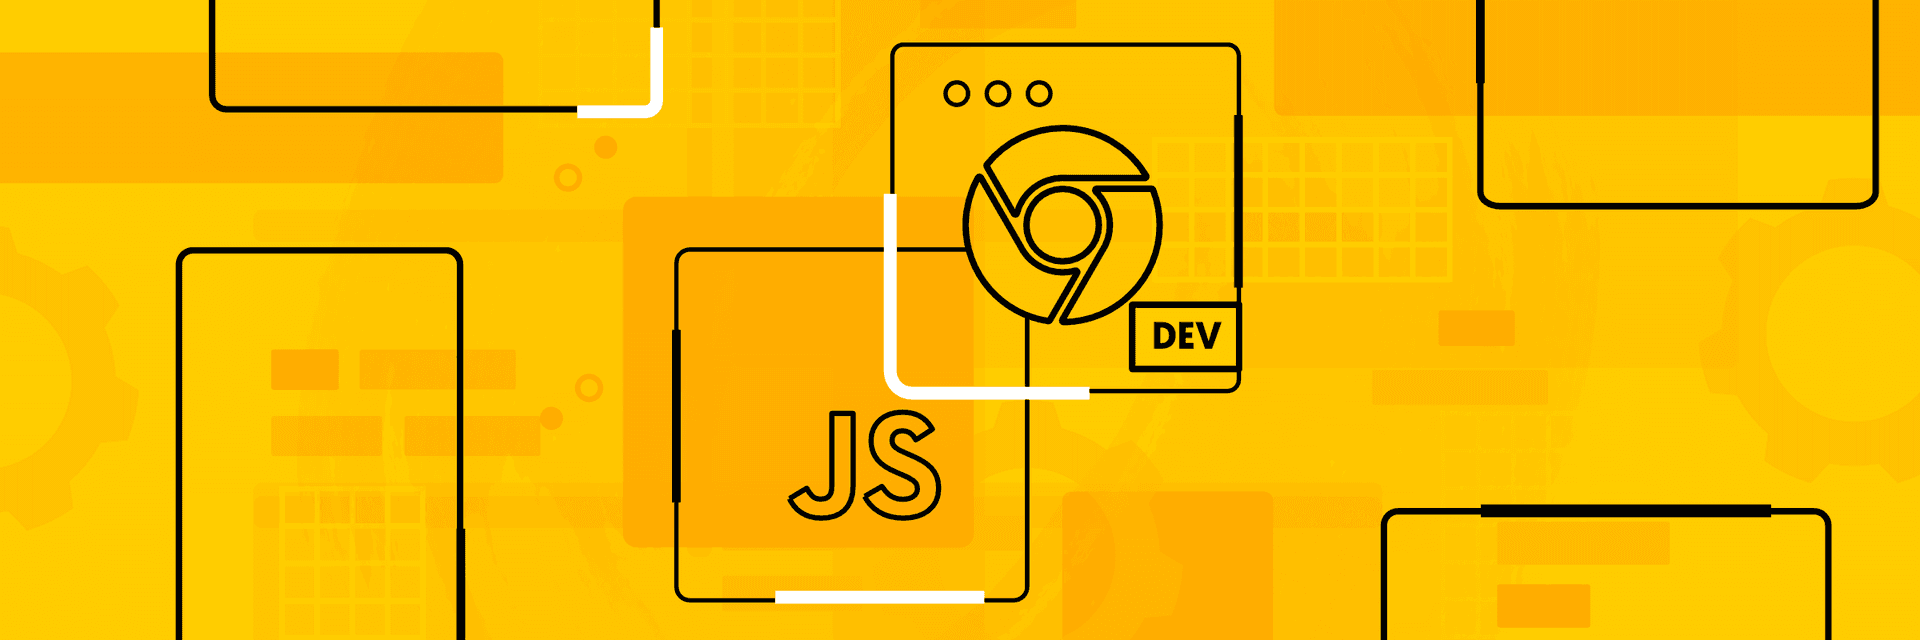 How to efficiently debug JavaScript with Chrome DevTools.